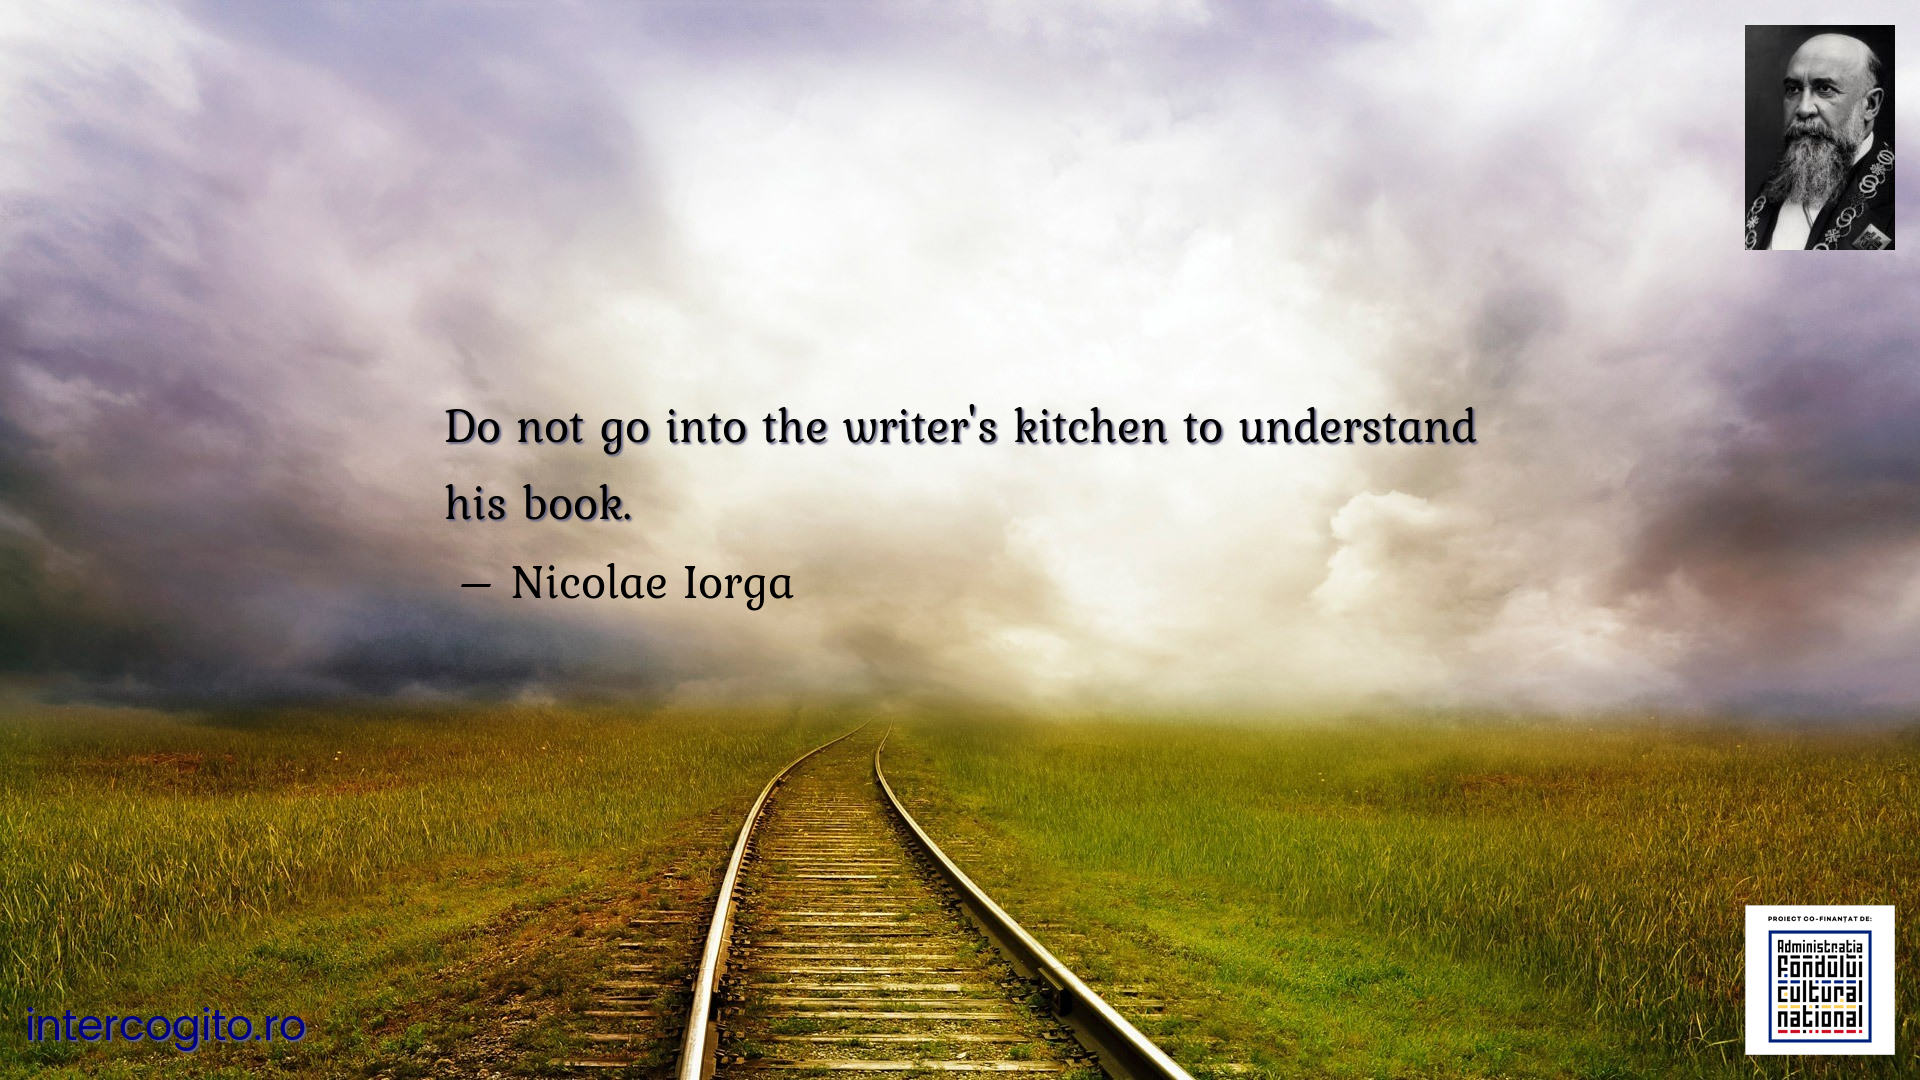 Do not go into the writer's kitchen to understand his book.